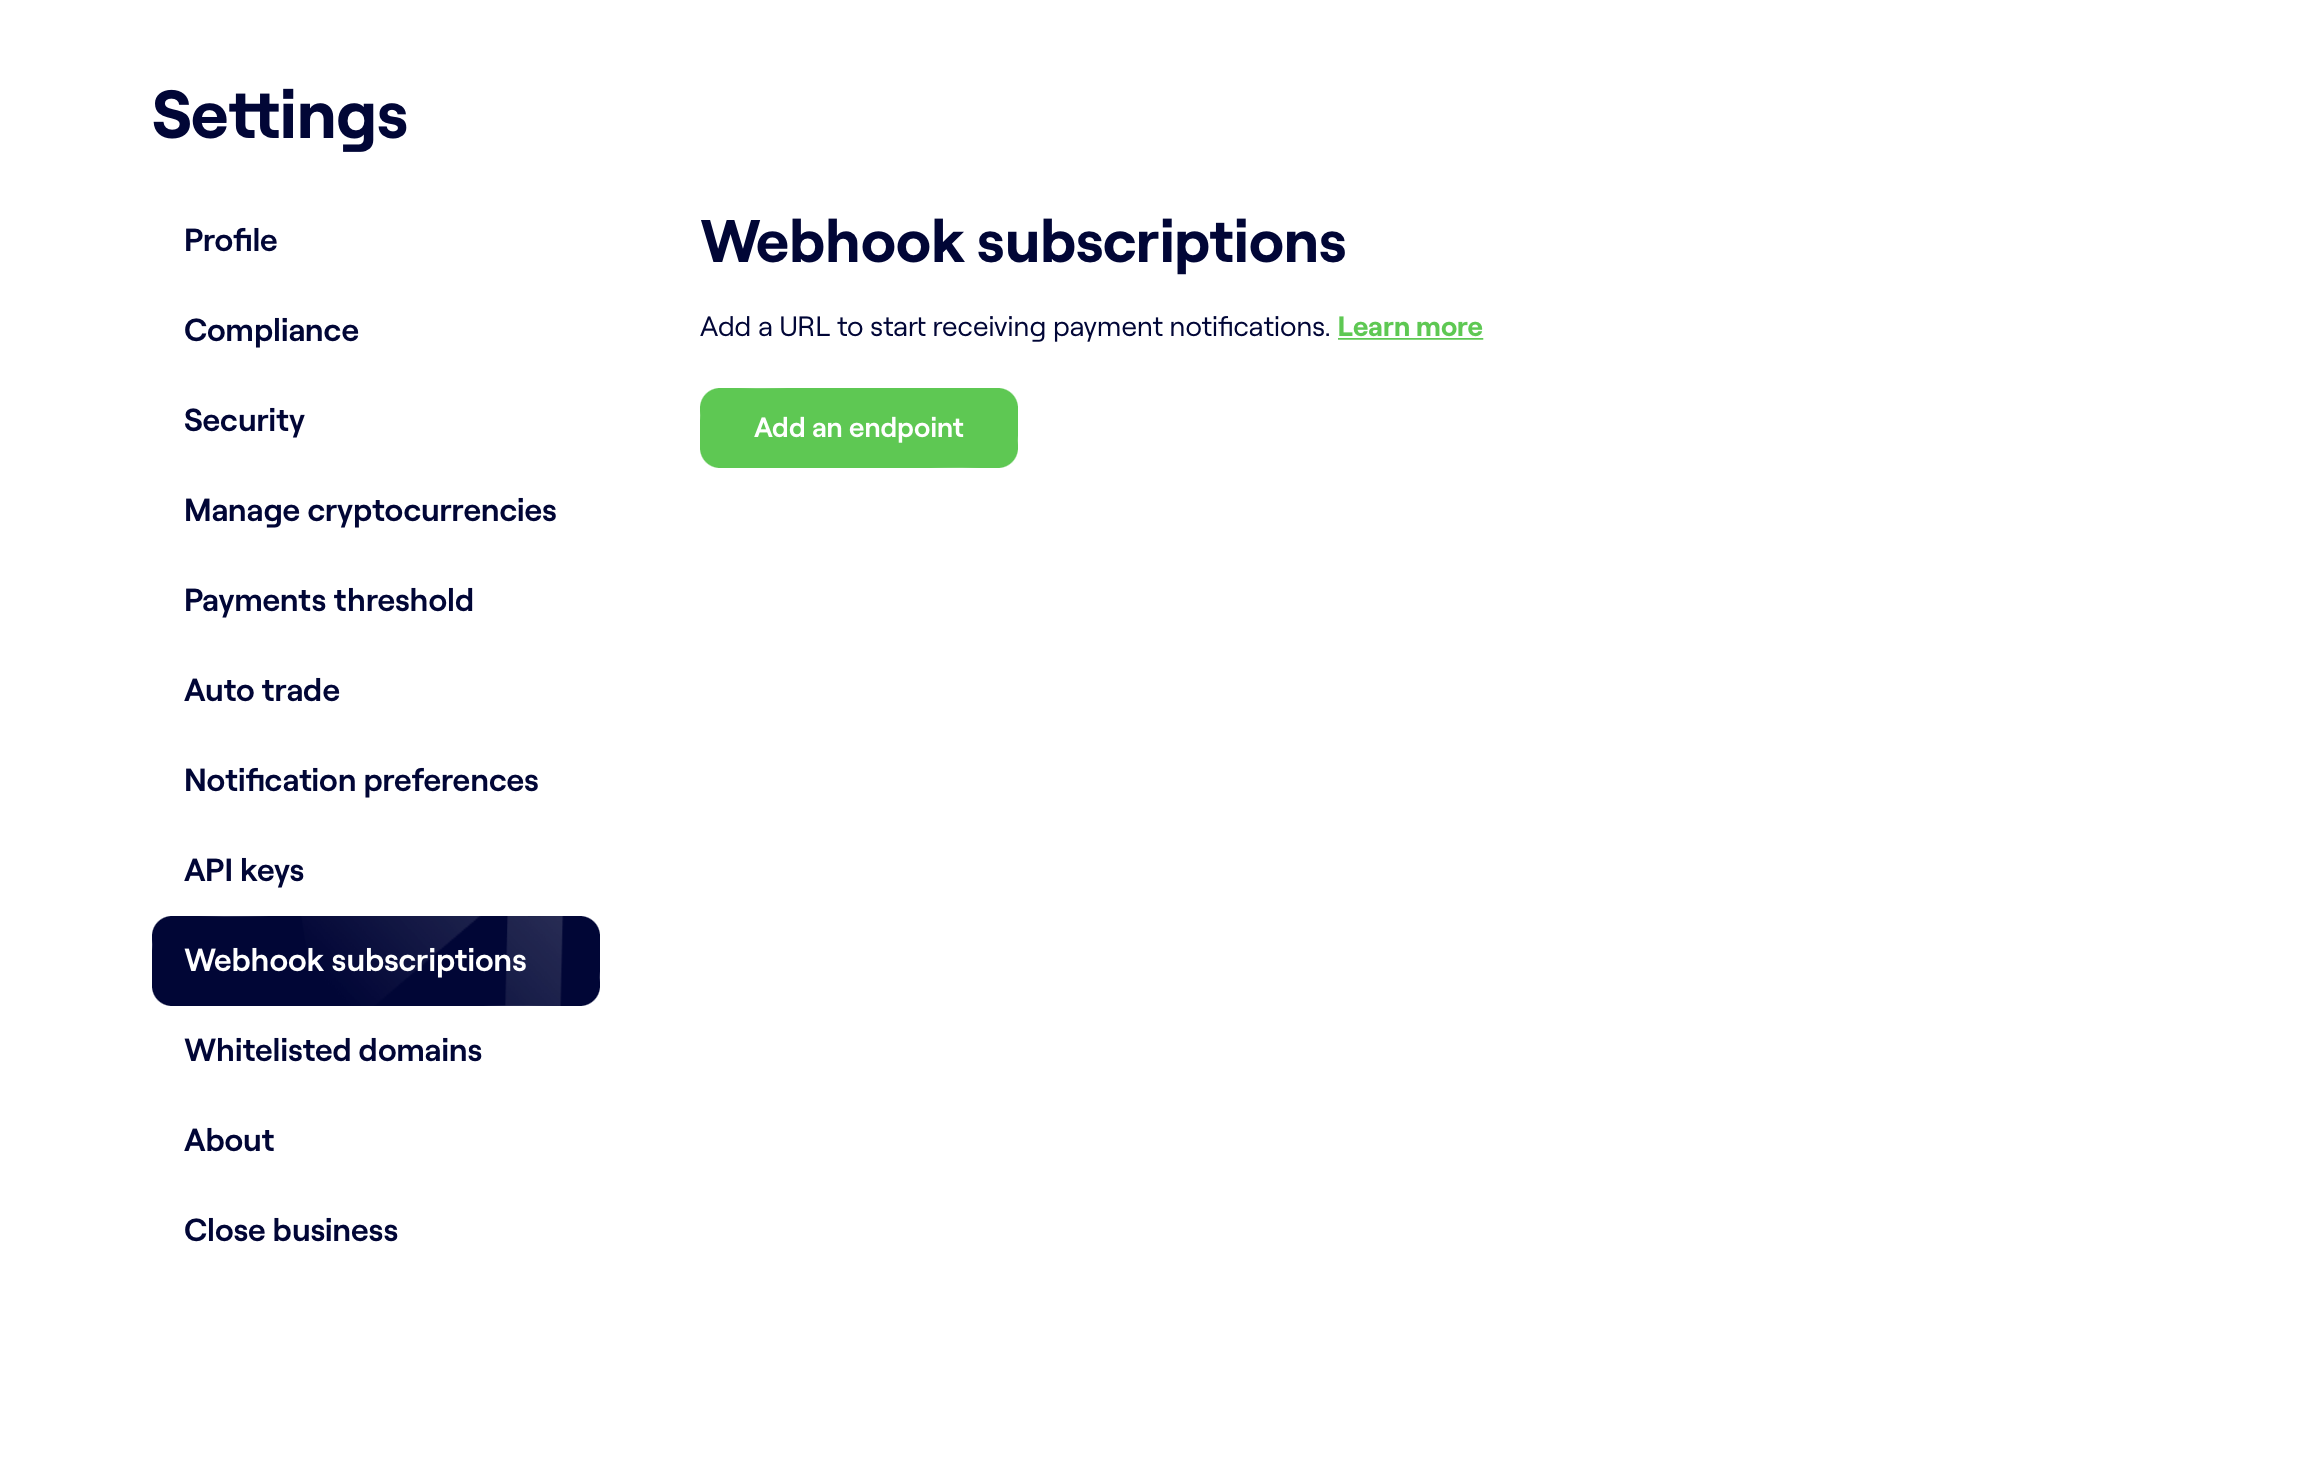 webhook subscriptions page under settings